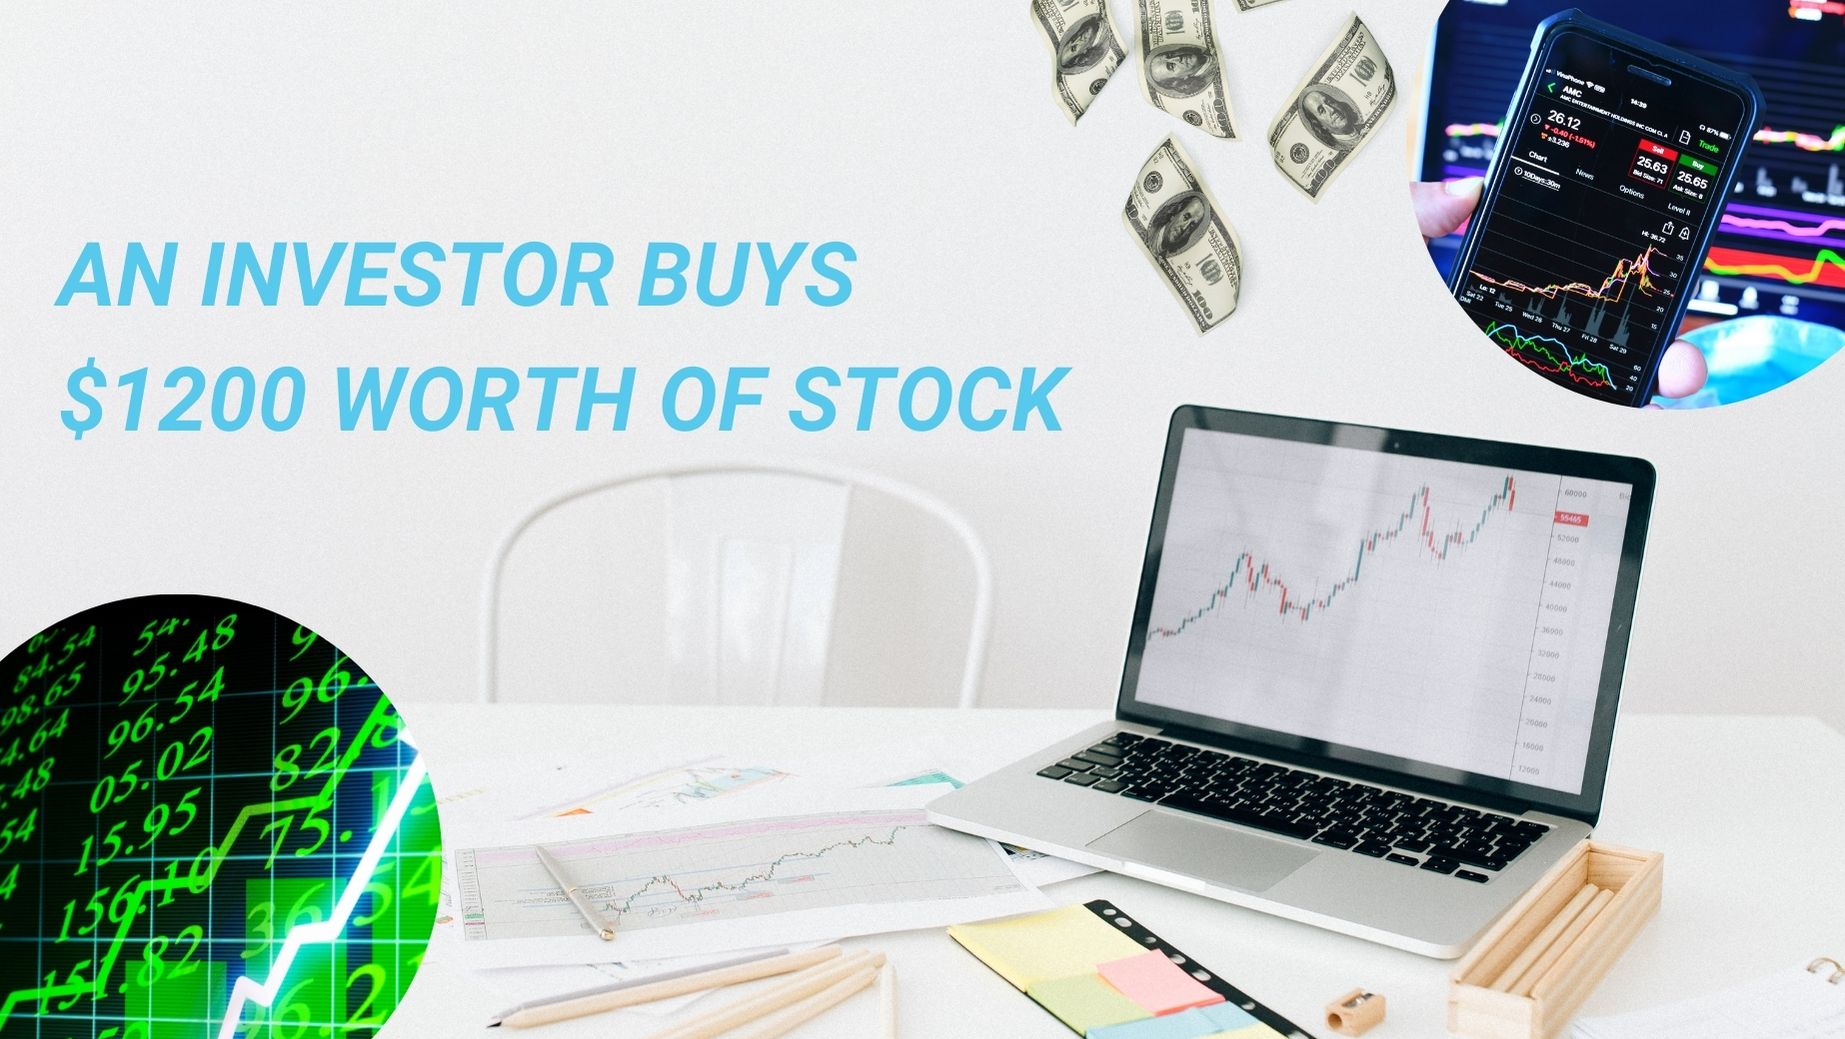 An Investor Buys $1200 Worth of Stock